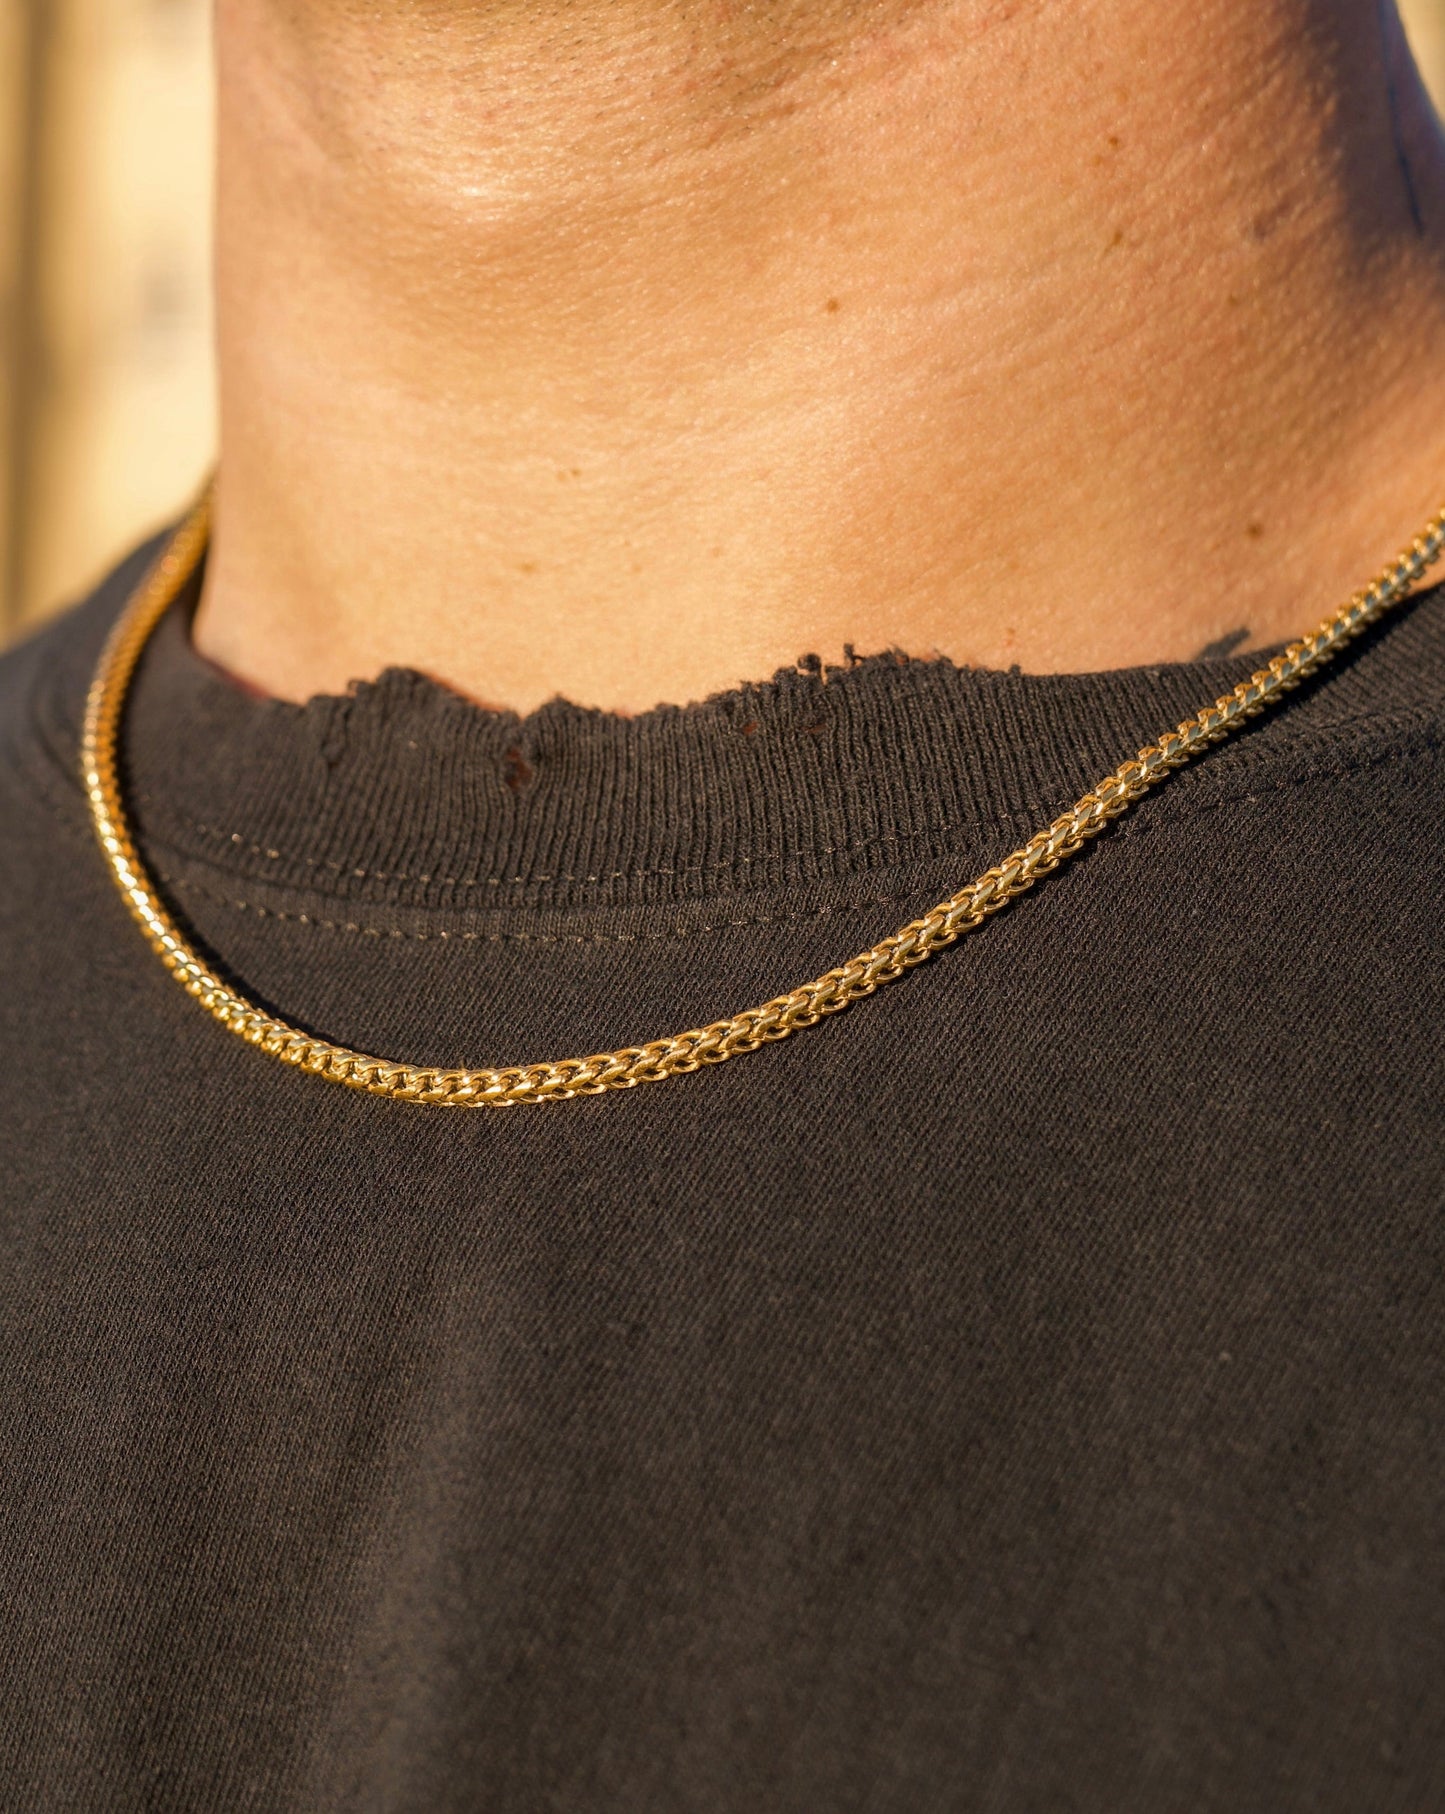 3mm Franco Chain - Gold